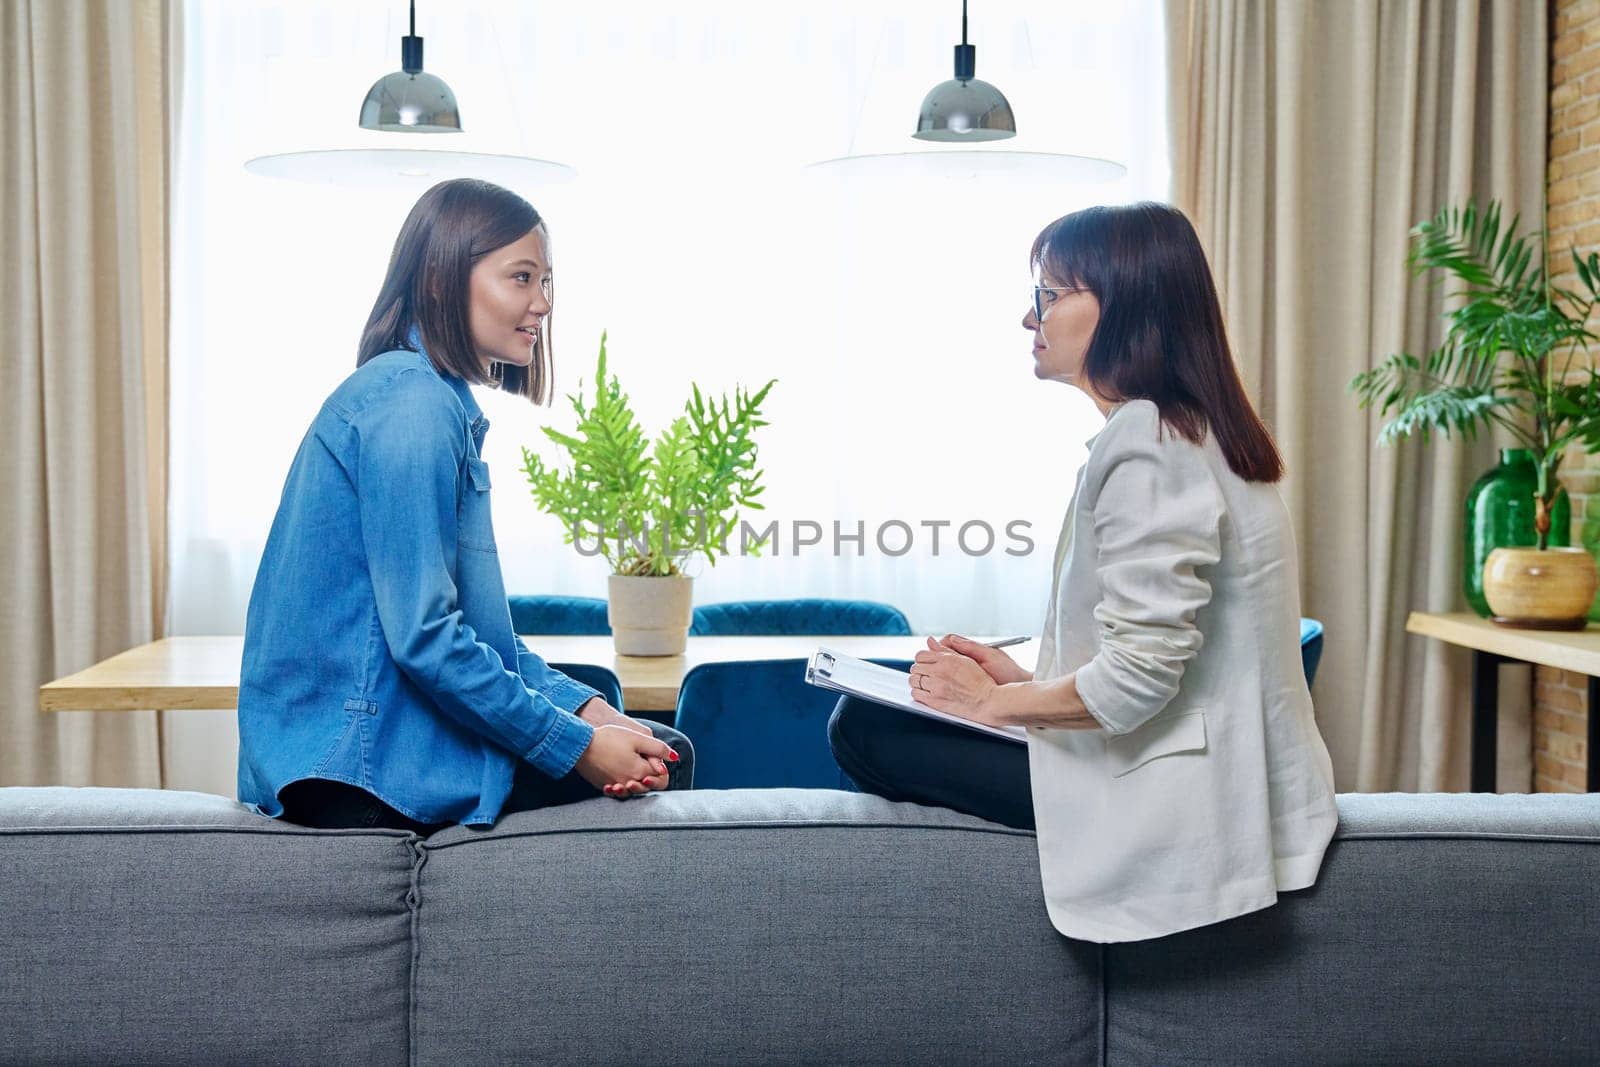 Happy joyful young woman patient talking to female psychologist counselor at therapy session. Positive treatment results, mental health of youth. Psychology psychotherapy support help rehabilitation